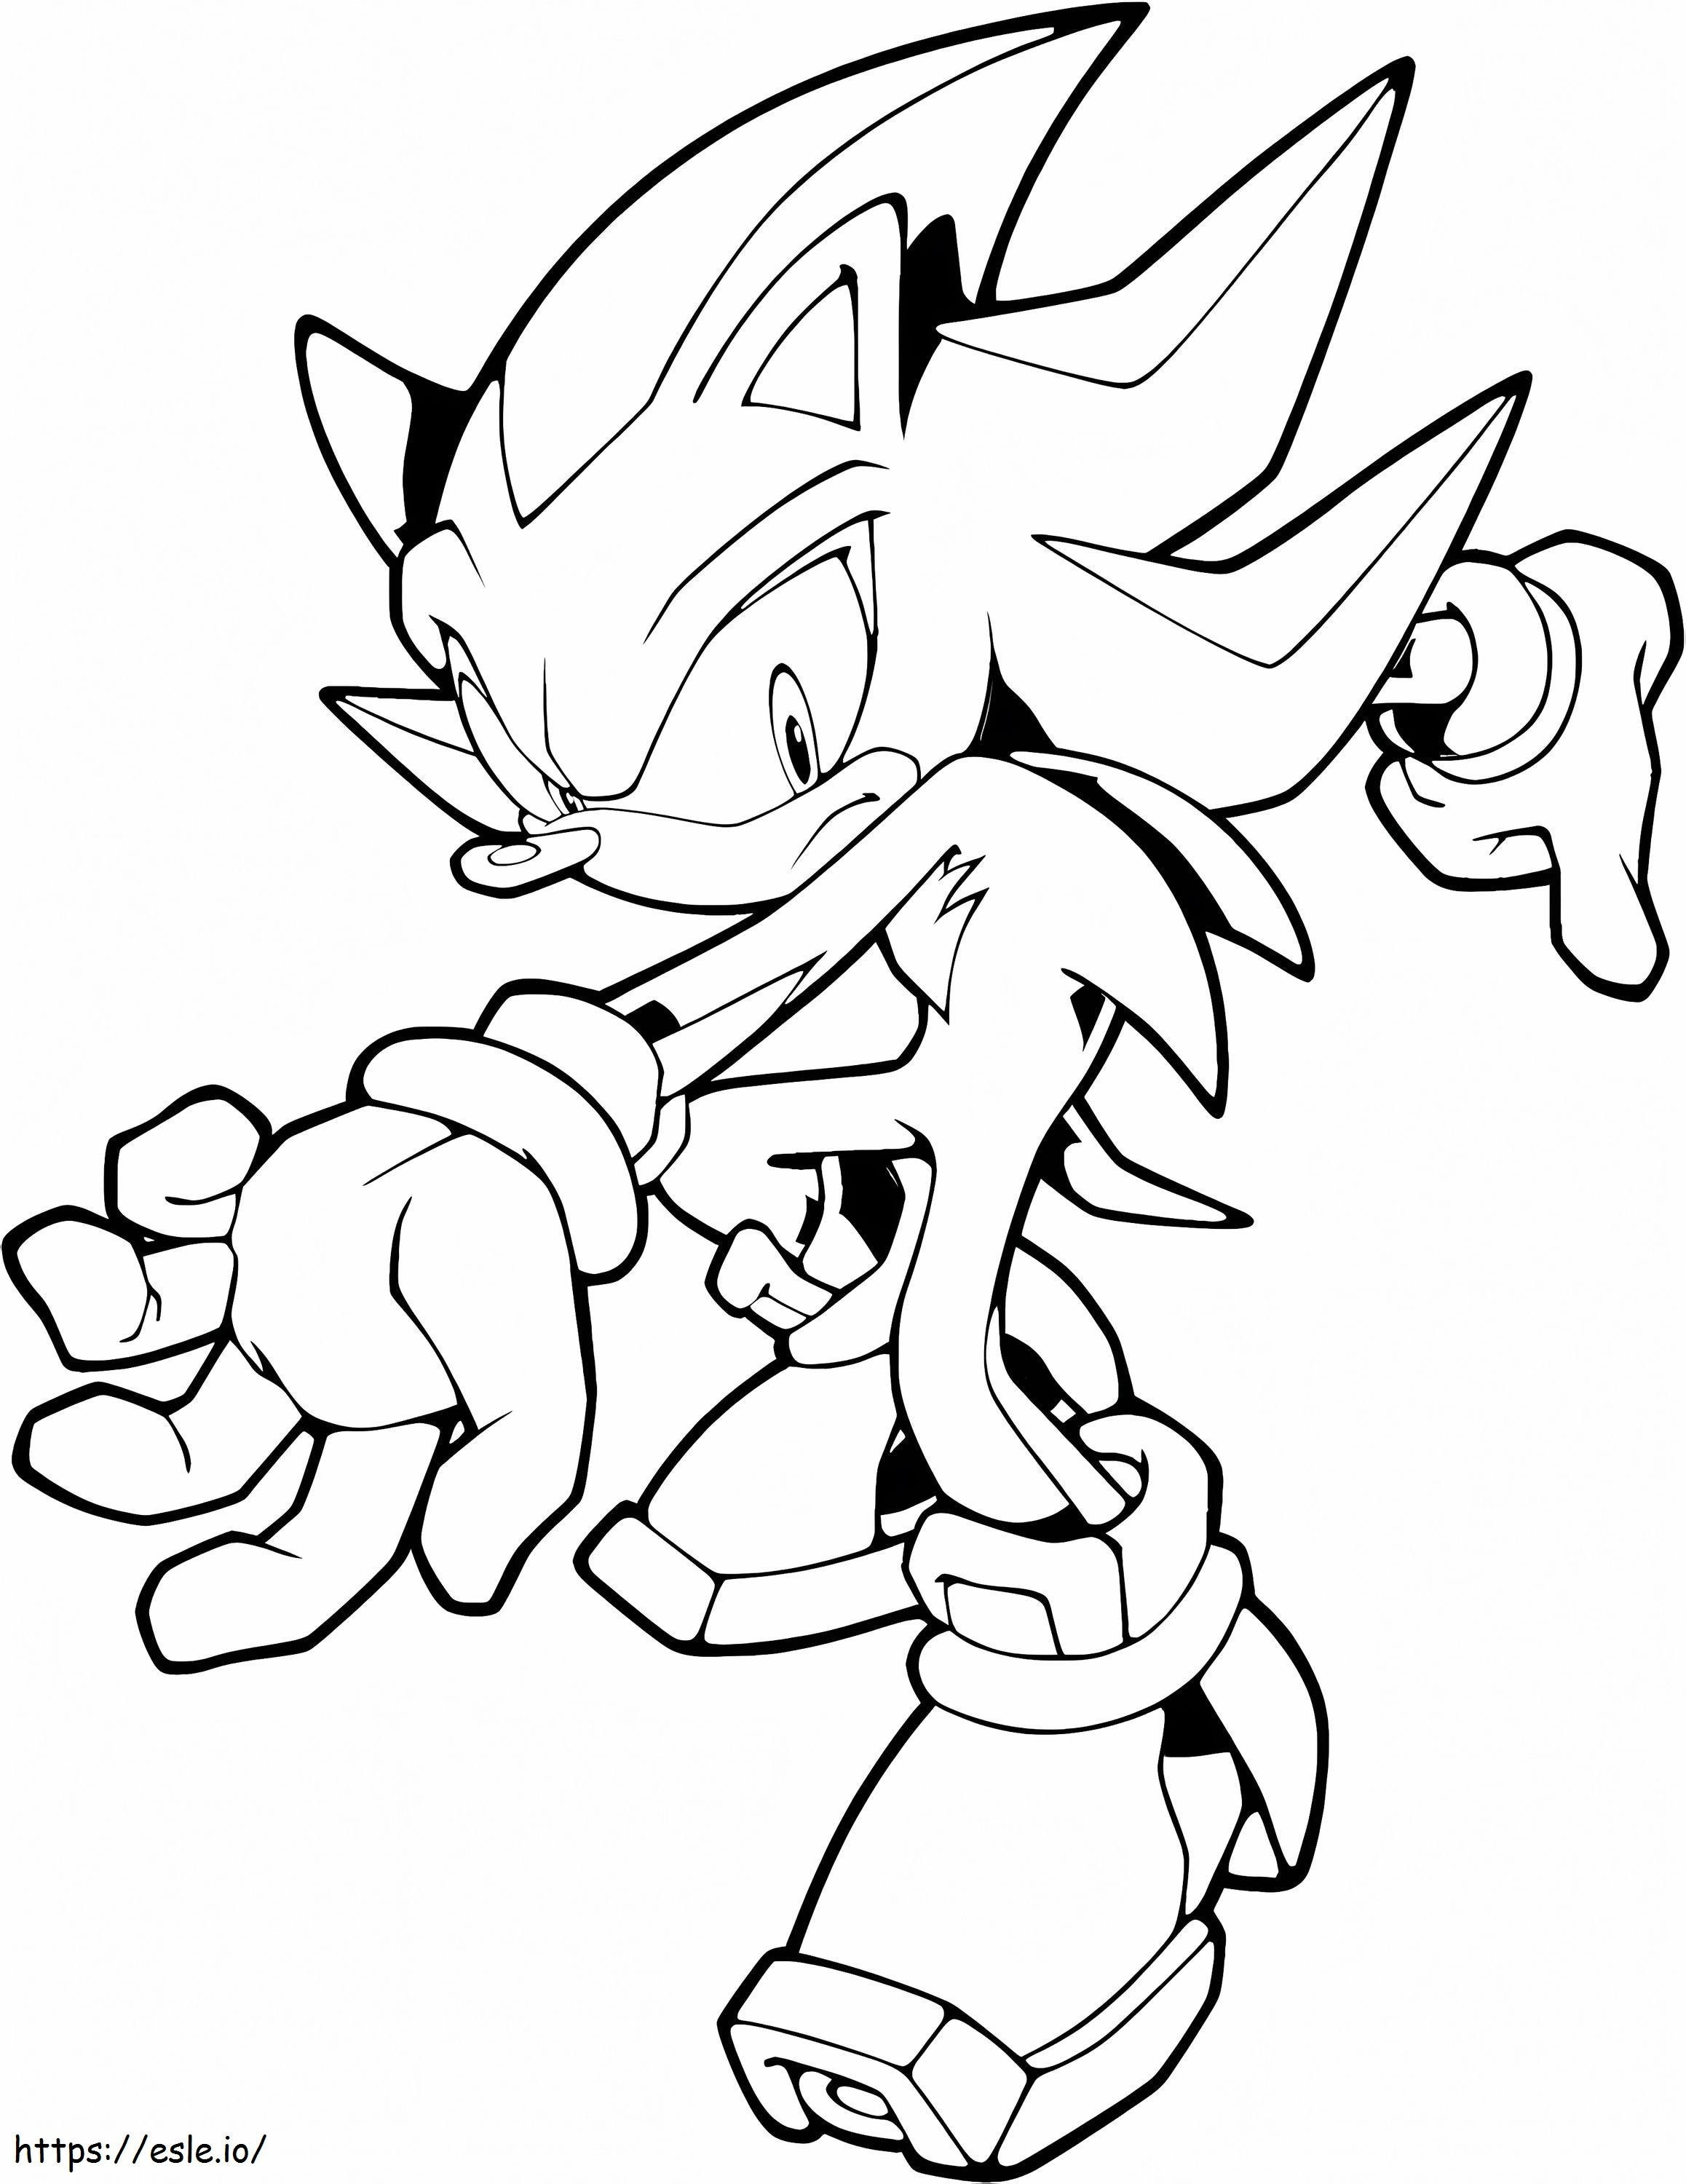 Cool Shadow The Hedgehog coloring page